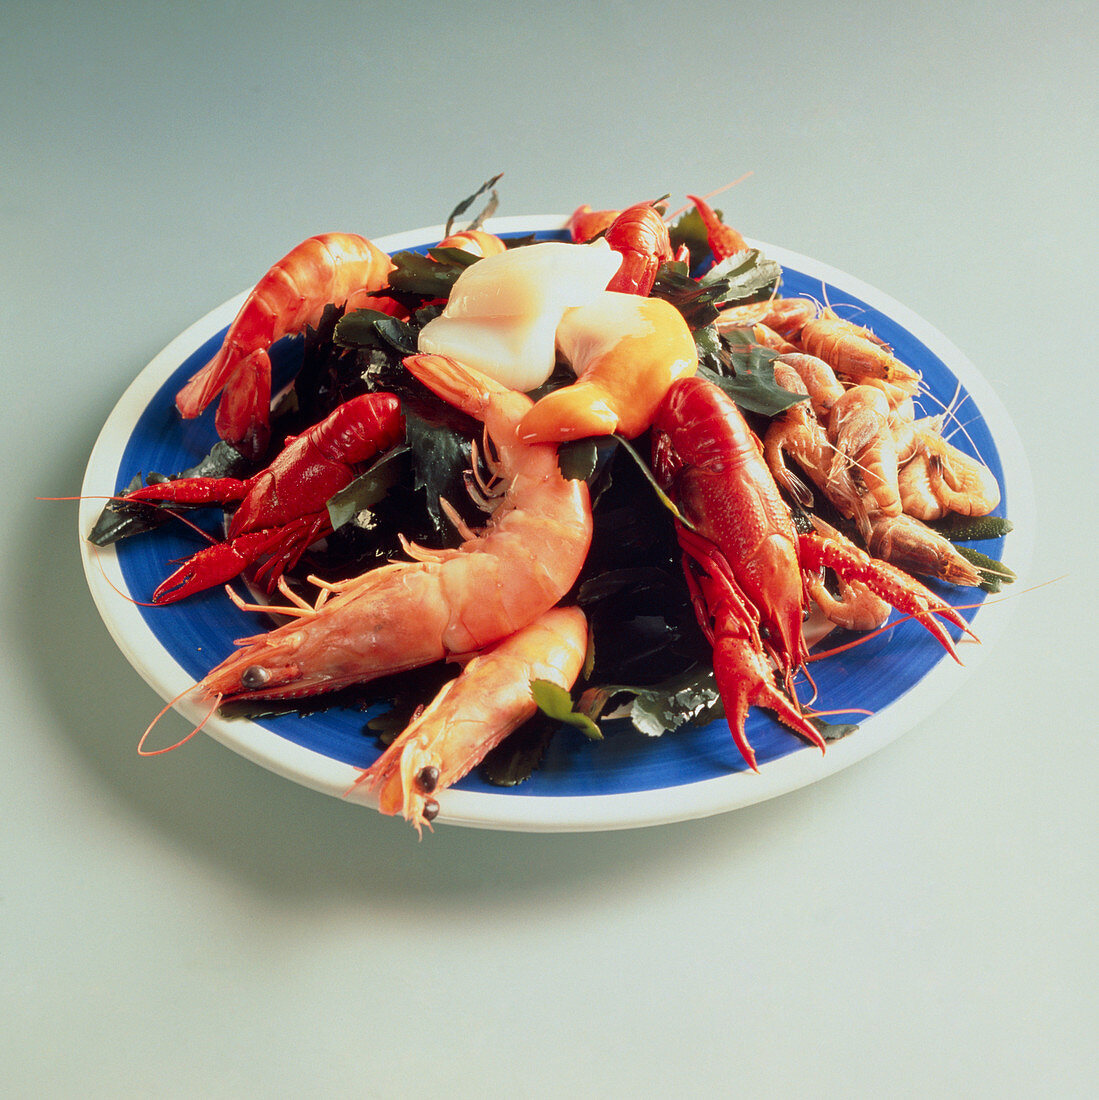 Plate of shellfish: prawn and lobster assortment